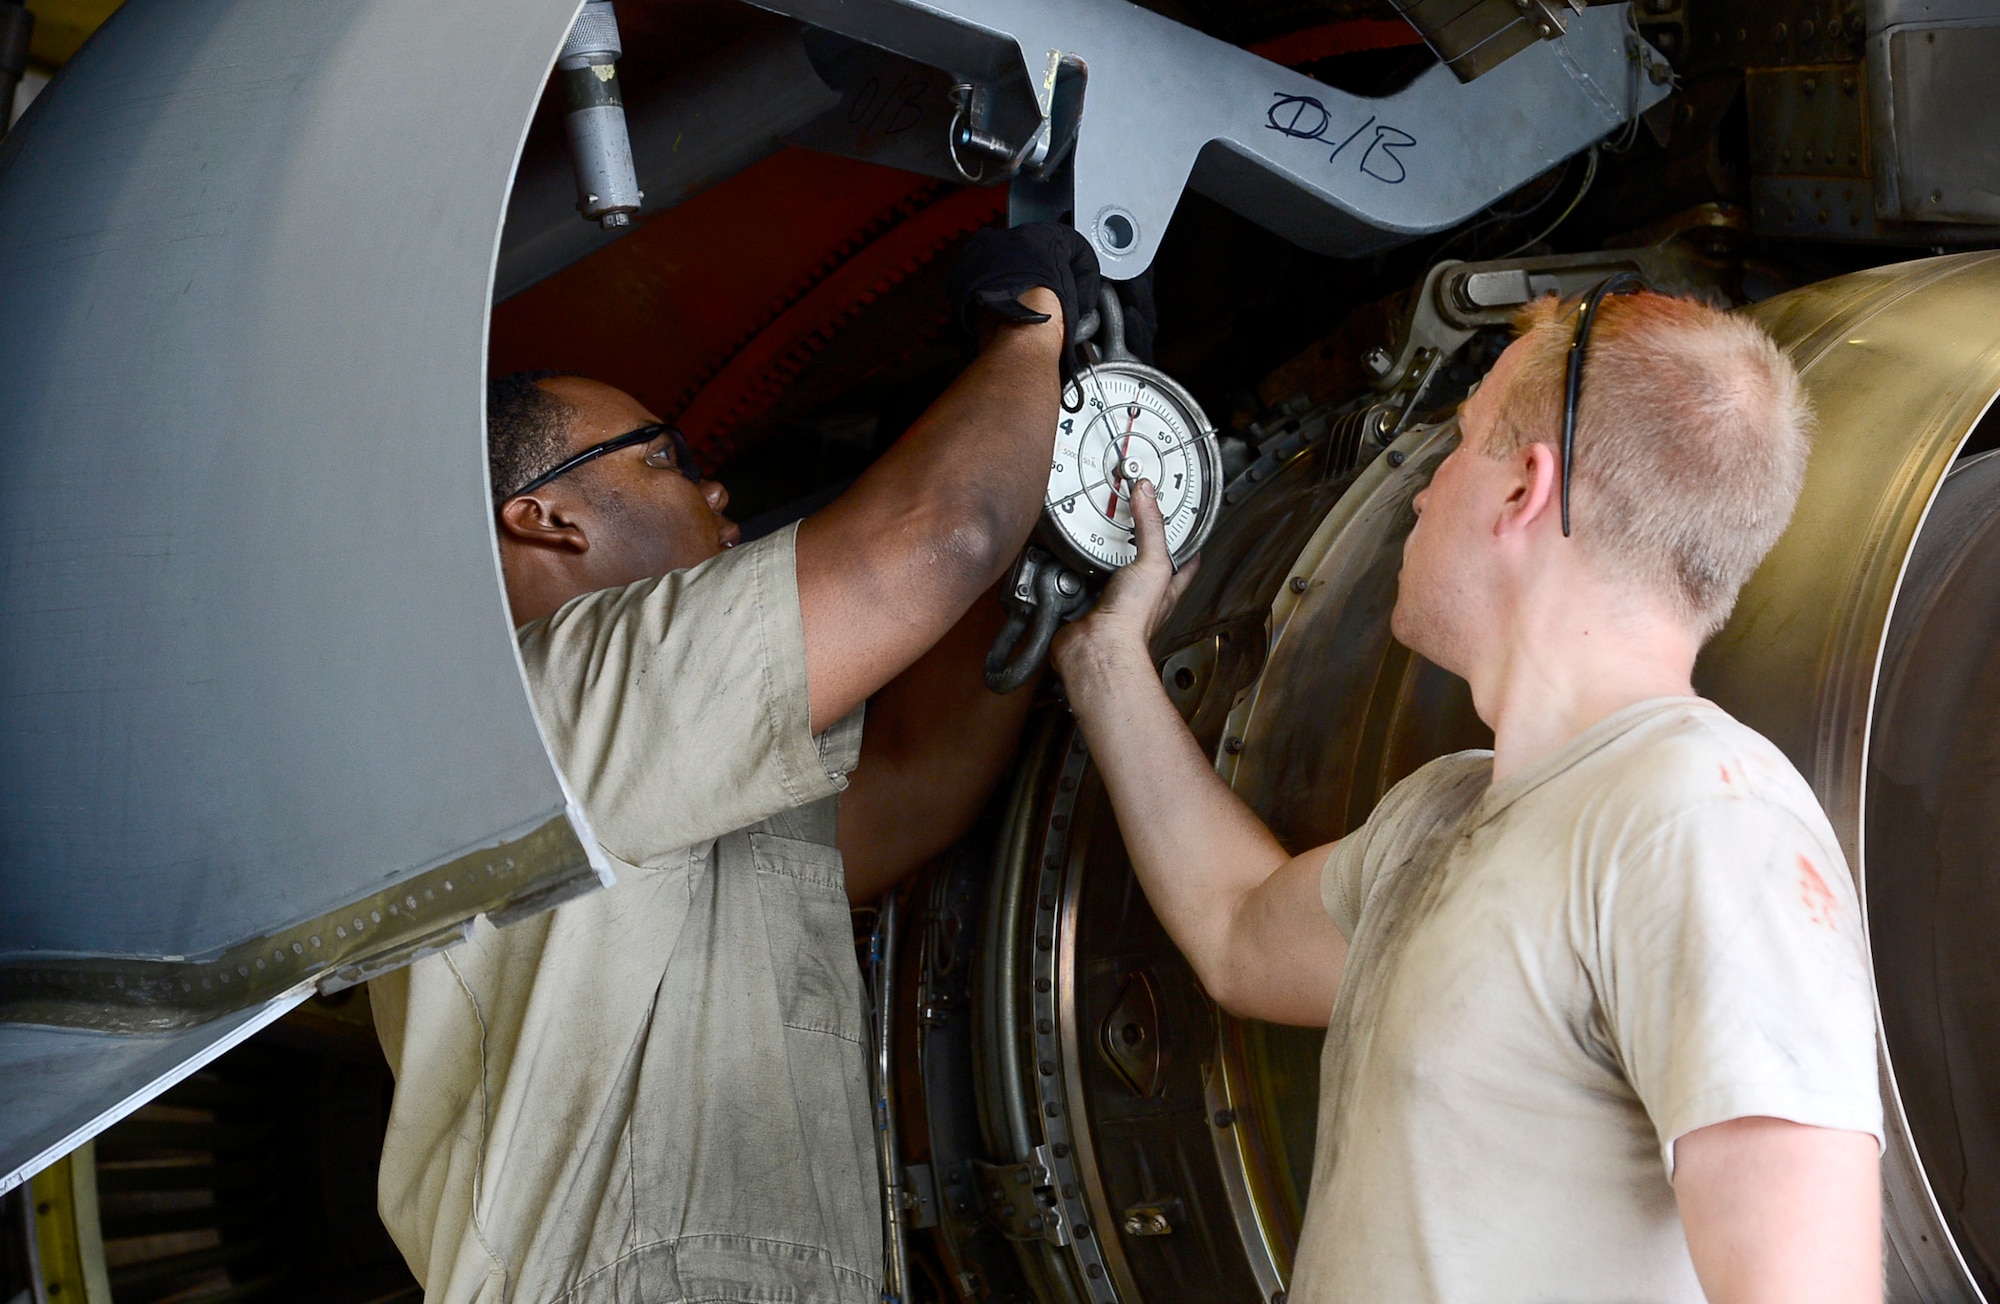 Airman 1st Class Blake Bennett, left, and Senior Airman Cody Evans, right, aerospace propulsion journeymen assigned to the 6th Maintenance Squadron, hang a dynamometer to a portion of a KC- 135 Stratotanker during an inspection at MacDill Air Force Base, Fla., June 28, 2016. Dynamometers are used to measure the amount of weight on the engine trailer. The inspection was conducted to ensure the aircraft was mission ready after a hard landing. (U.S. Air Force photo by Senior Airman Tori Schultz)